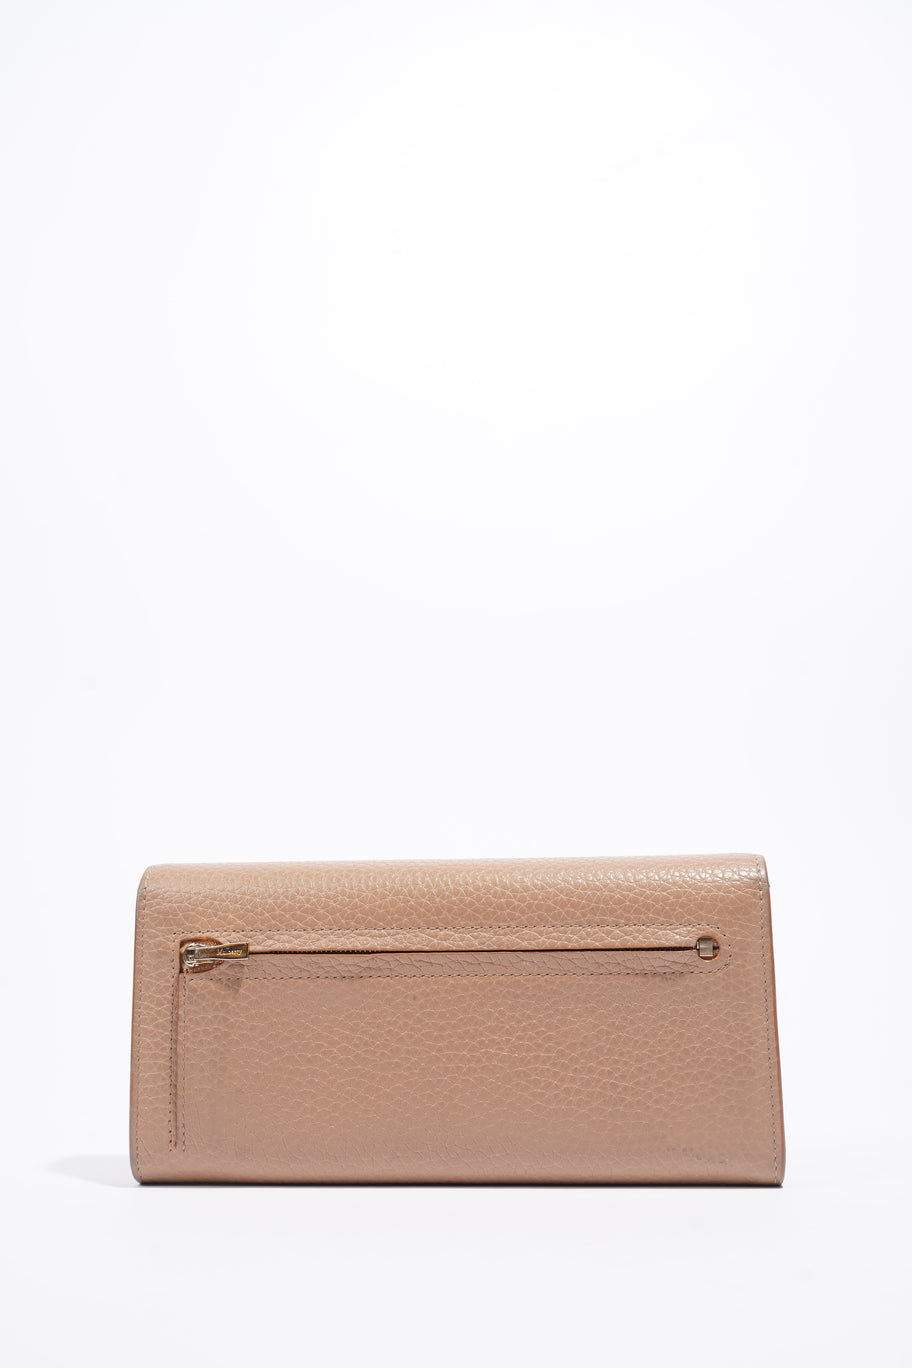 Continental Wallet Light Salmon Grained Leather Image 3